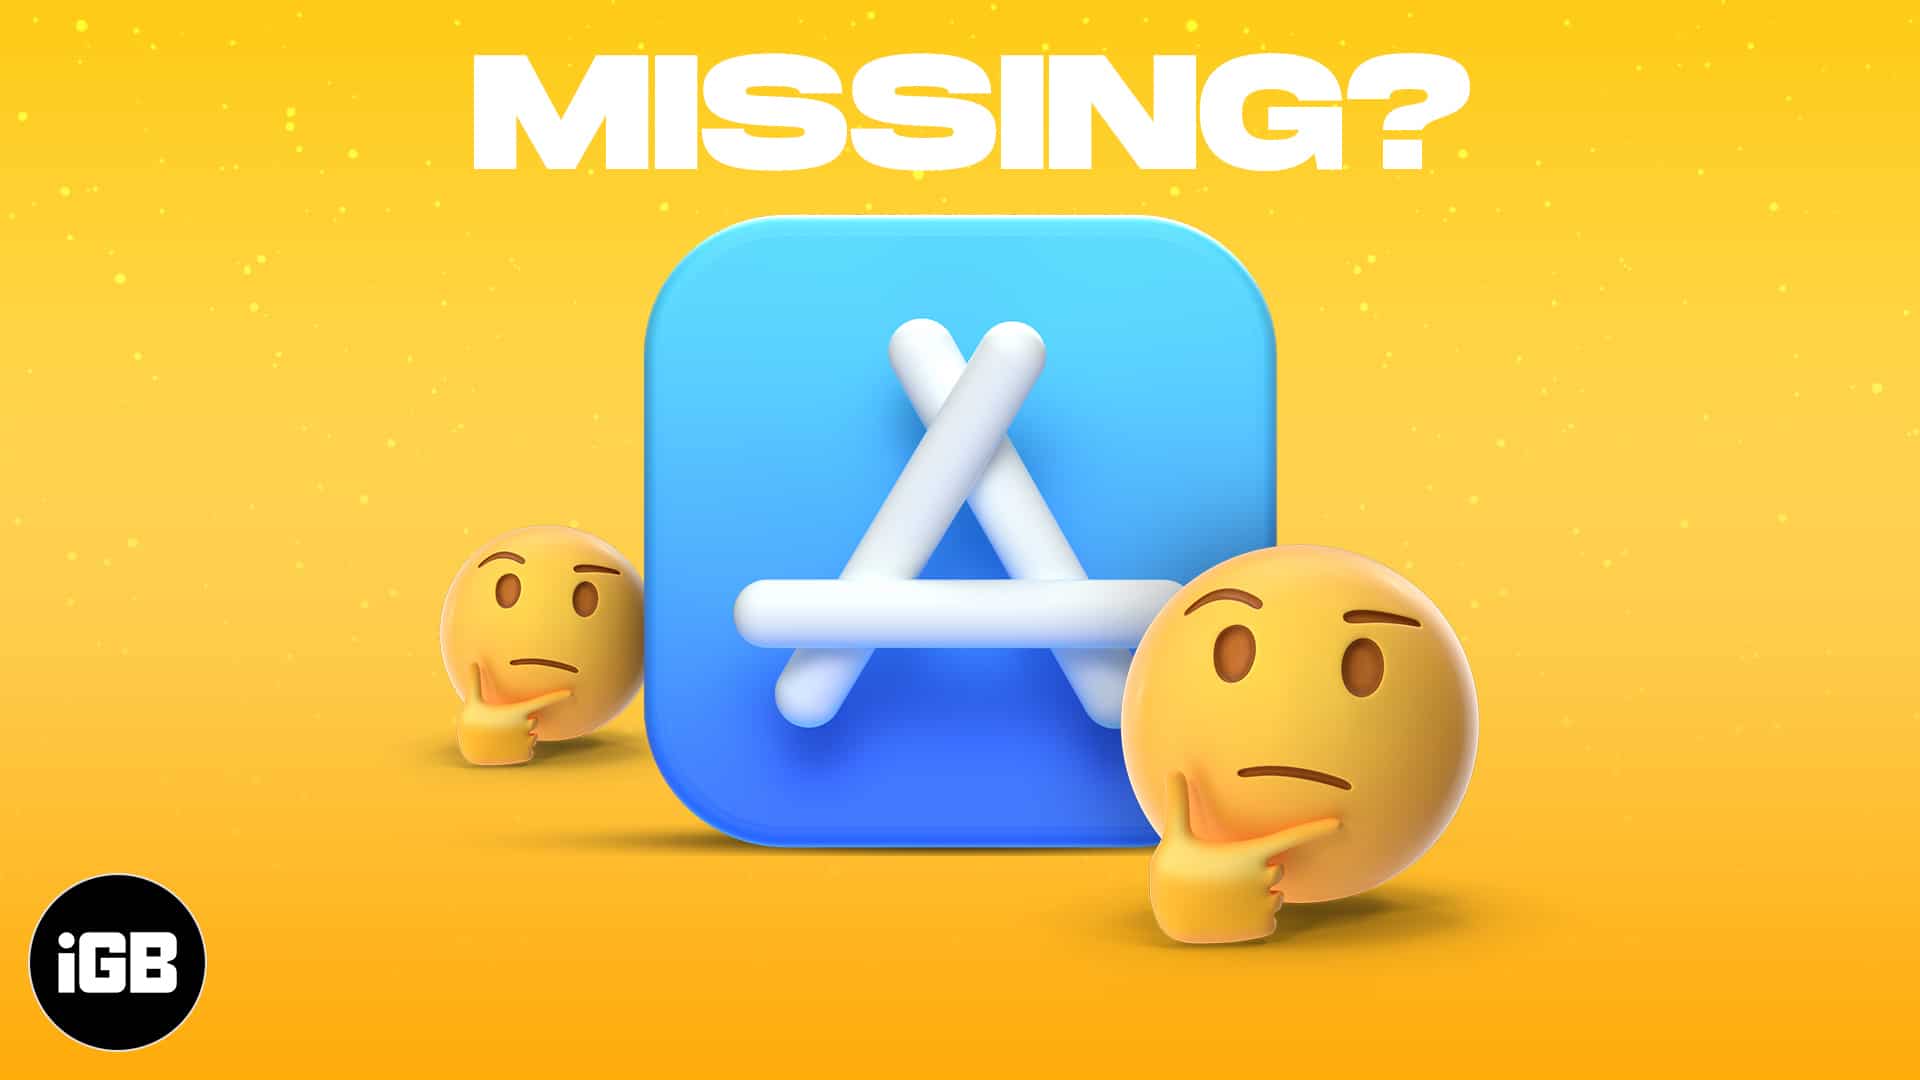 Restore app store icon missing on iphone